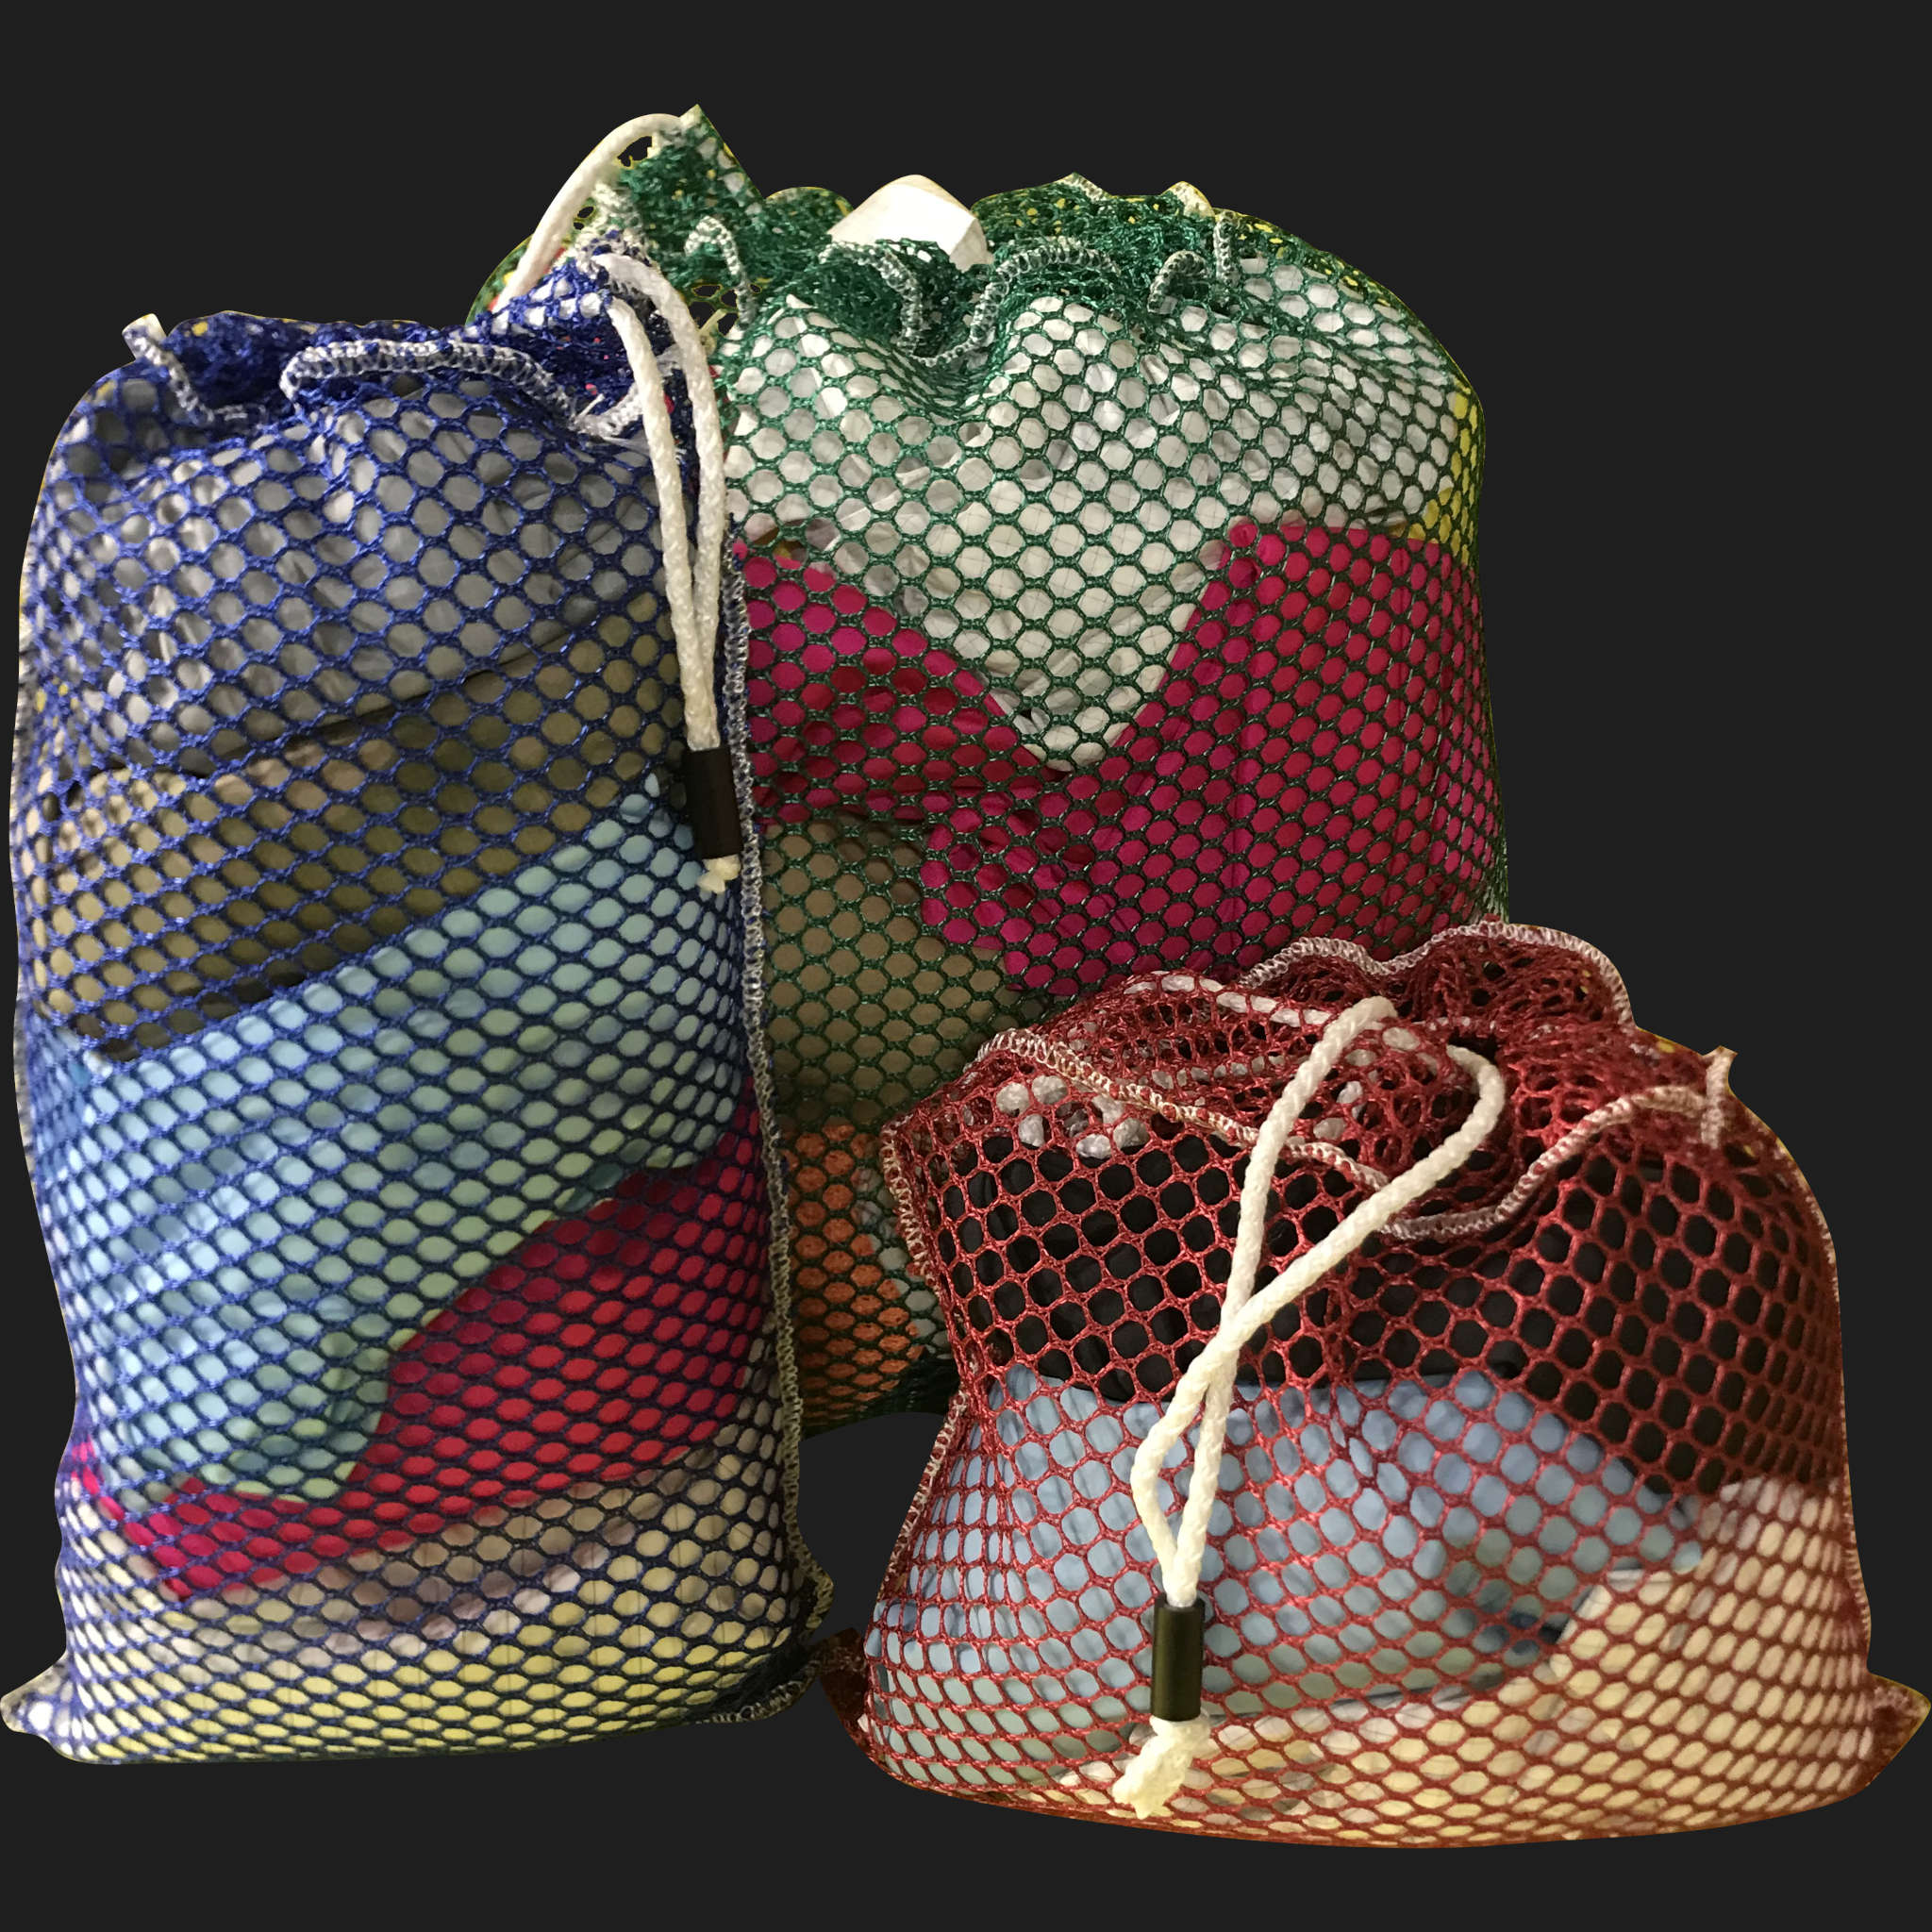 54" x 74" Customized Mesh-Net-Laundry Bags Heavy Duty with Cord and barrellock closure